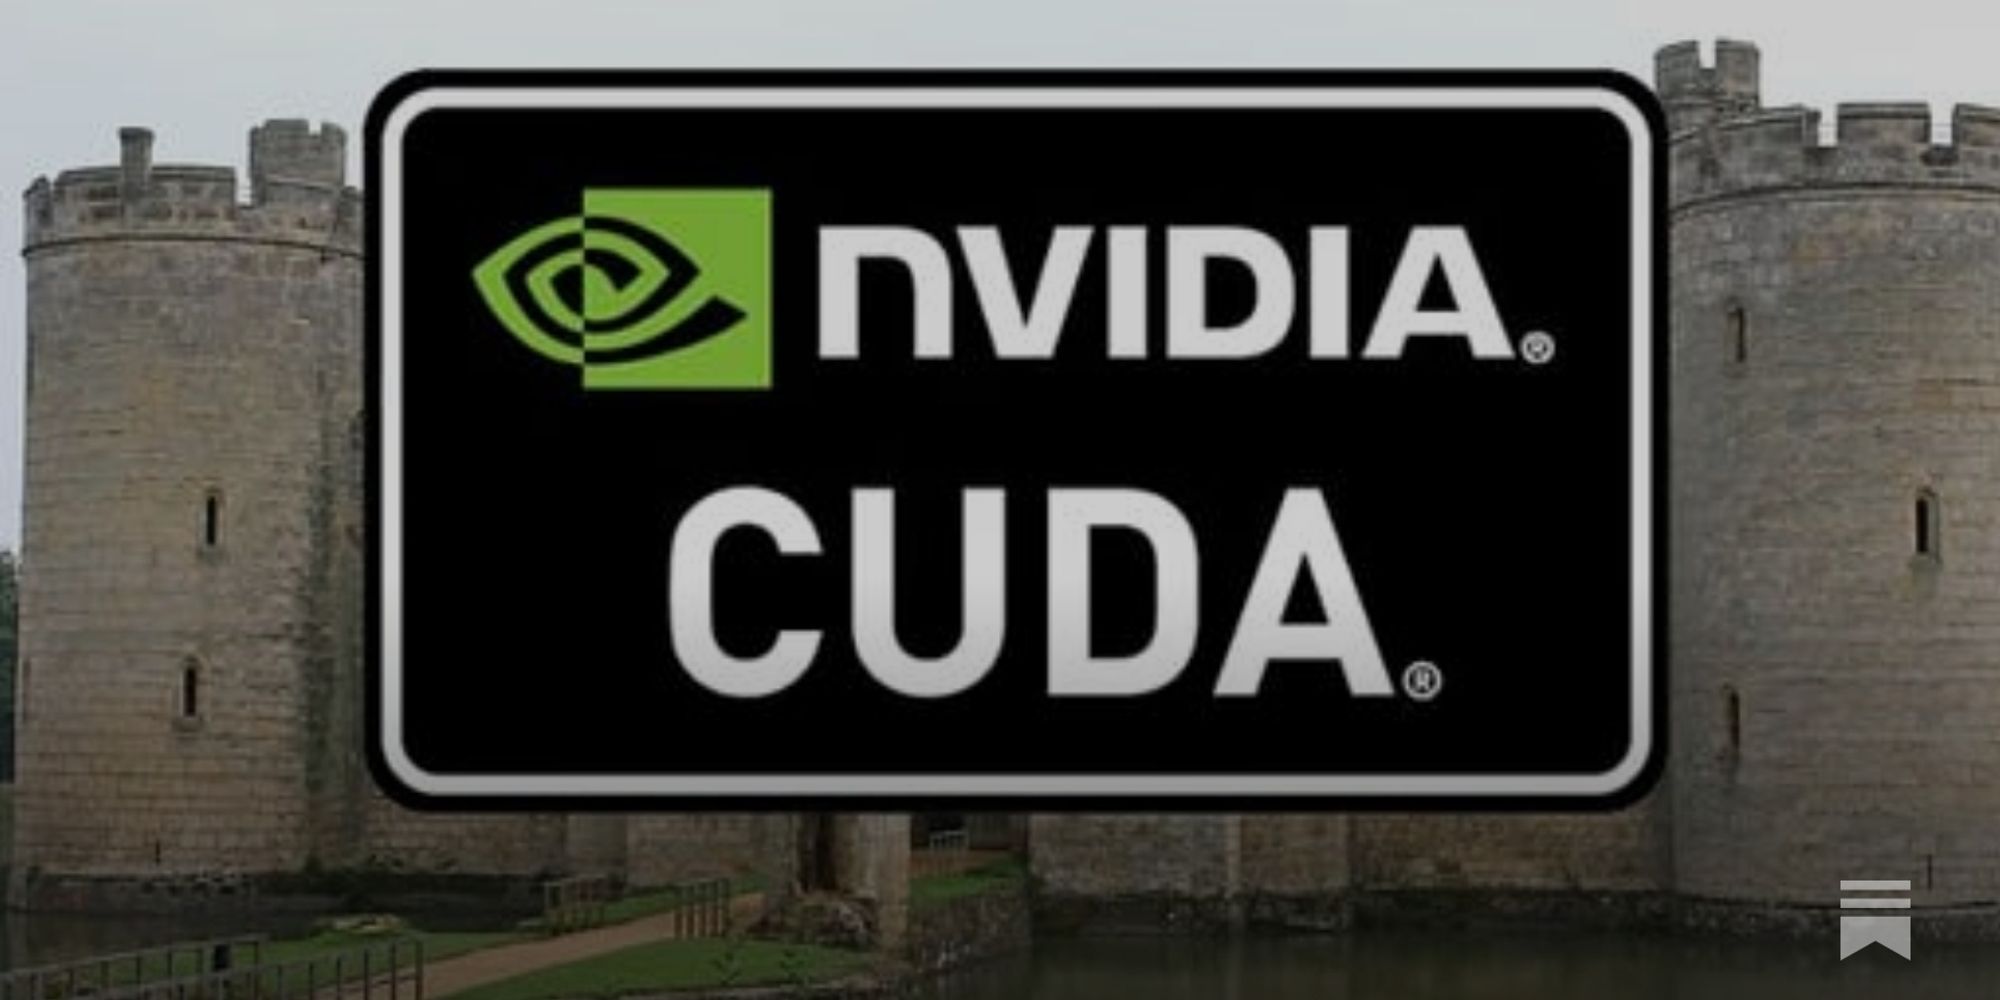 CUDA is Still a Giant Moat for NVIDIA